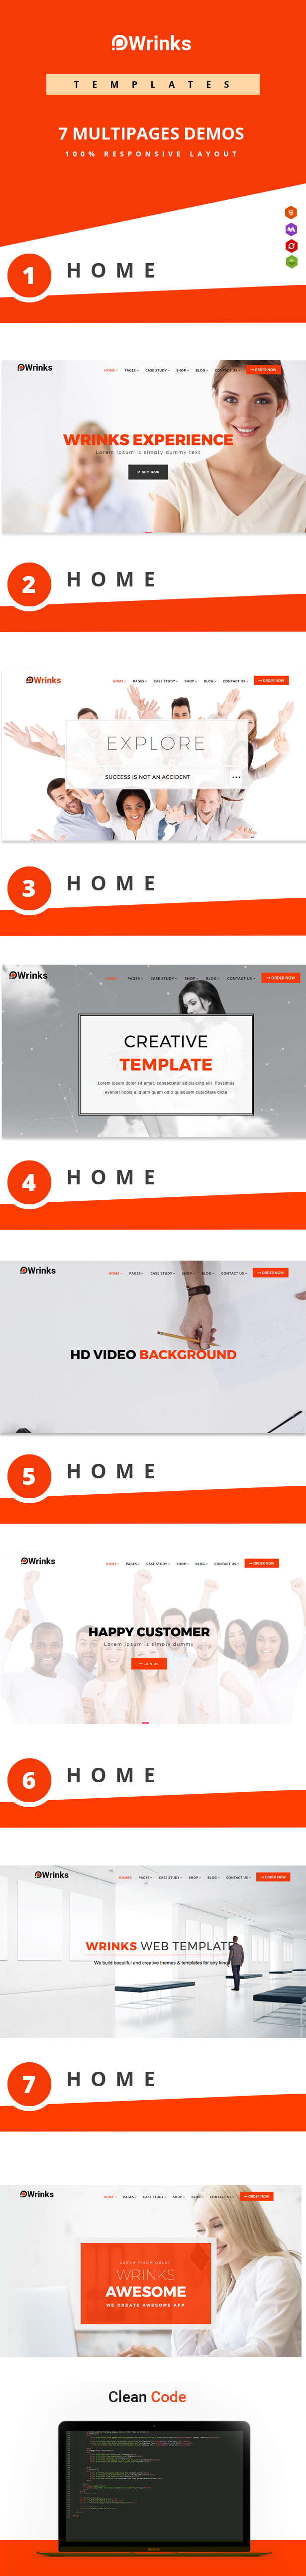 Wrinks - Multipages Business HTML5 Template - 1